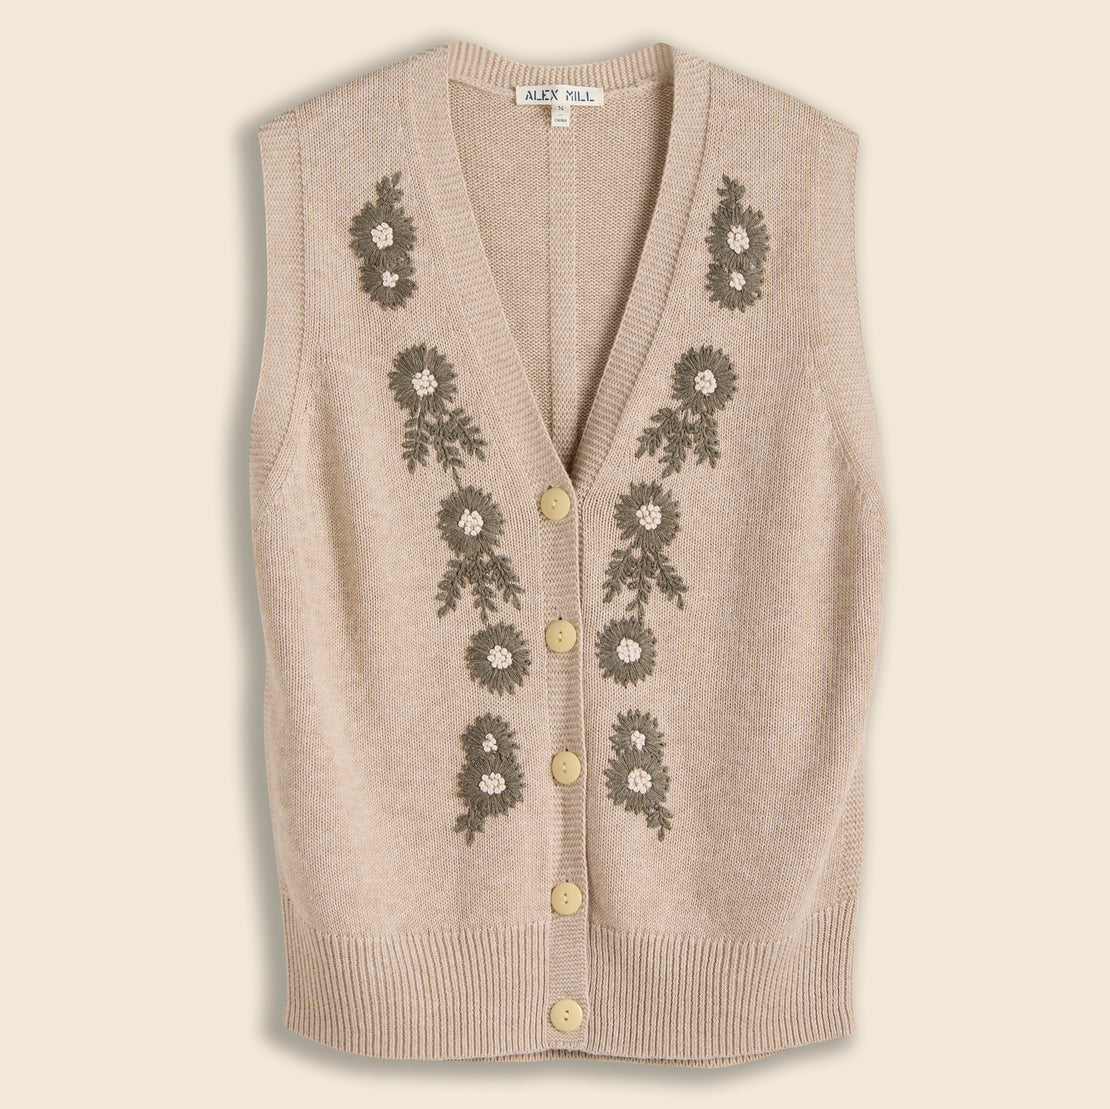 Alex Mill Embroidered Vest in Cotton Linen - Oatmeal